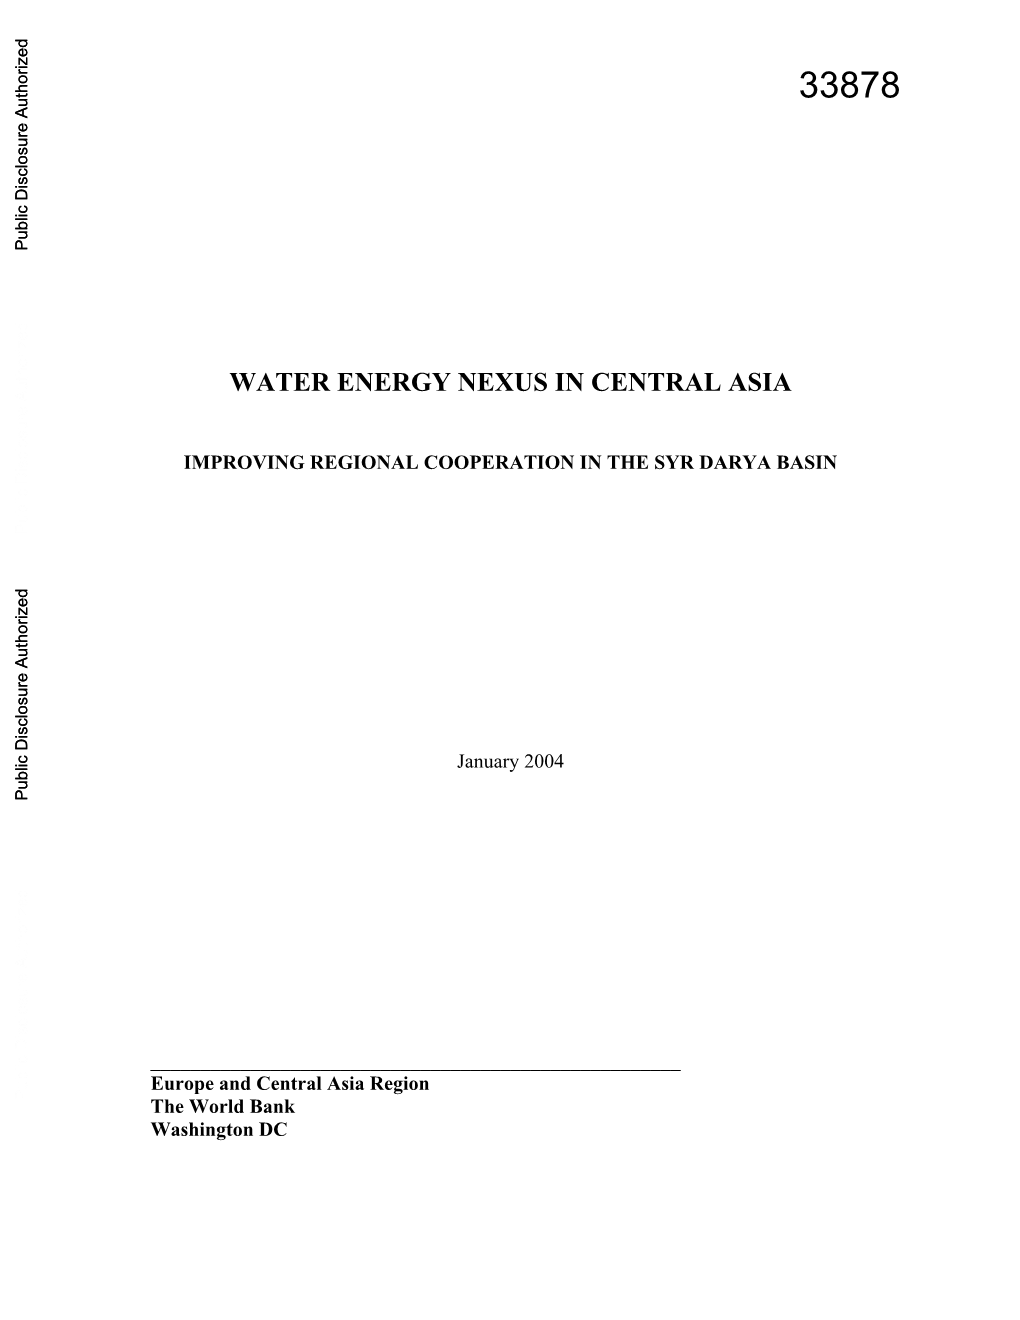 Water Energy Nexus in Central Asia